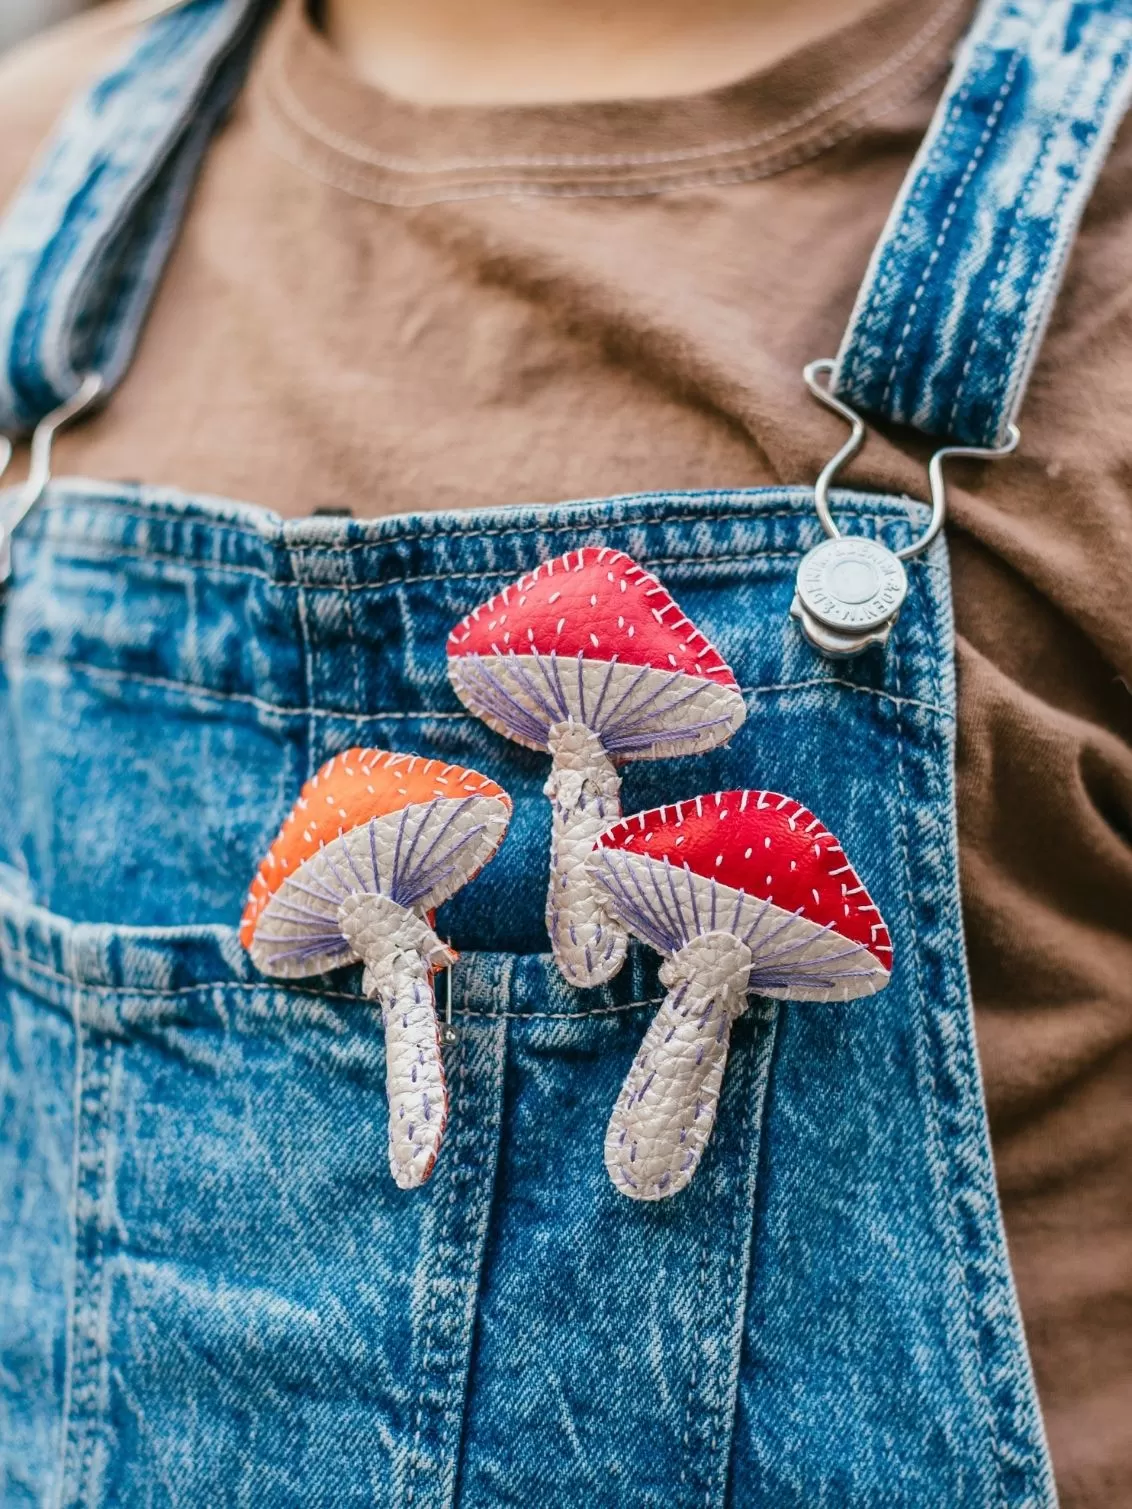 Three hand stitched faux leather toadstool brooches, in red, pink and orange seen on denim dungarees.